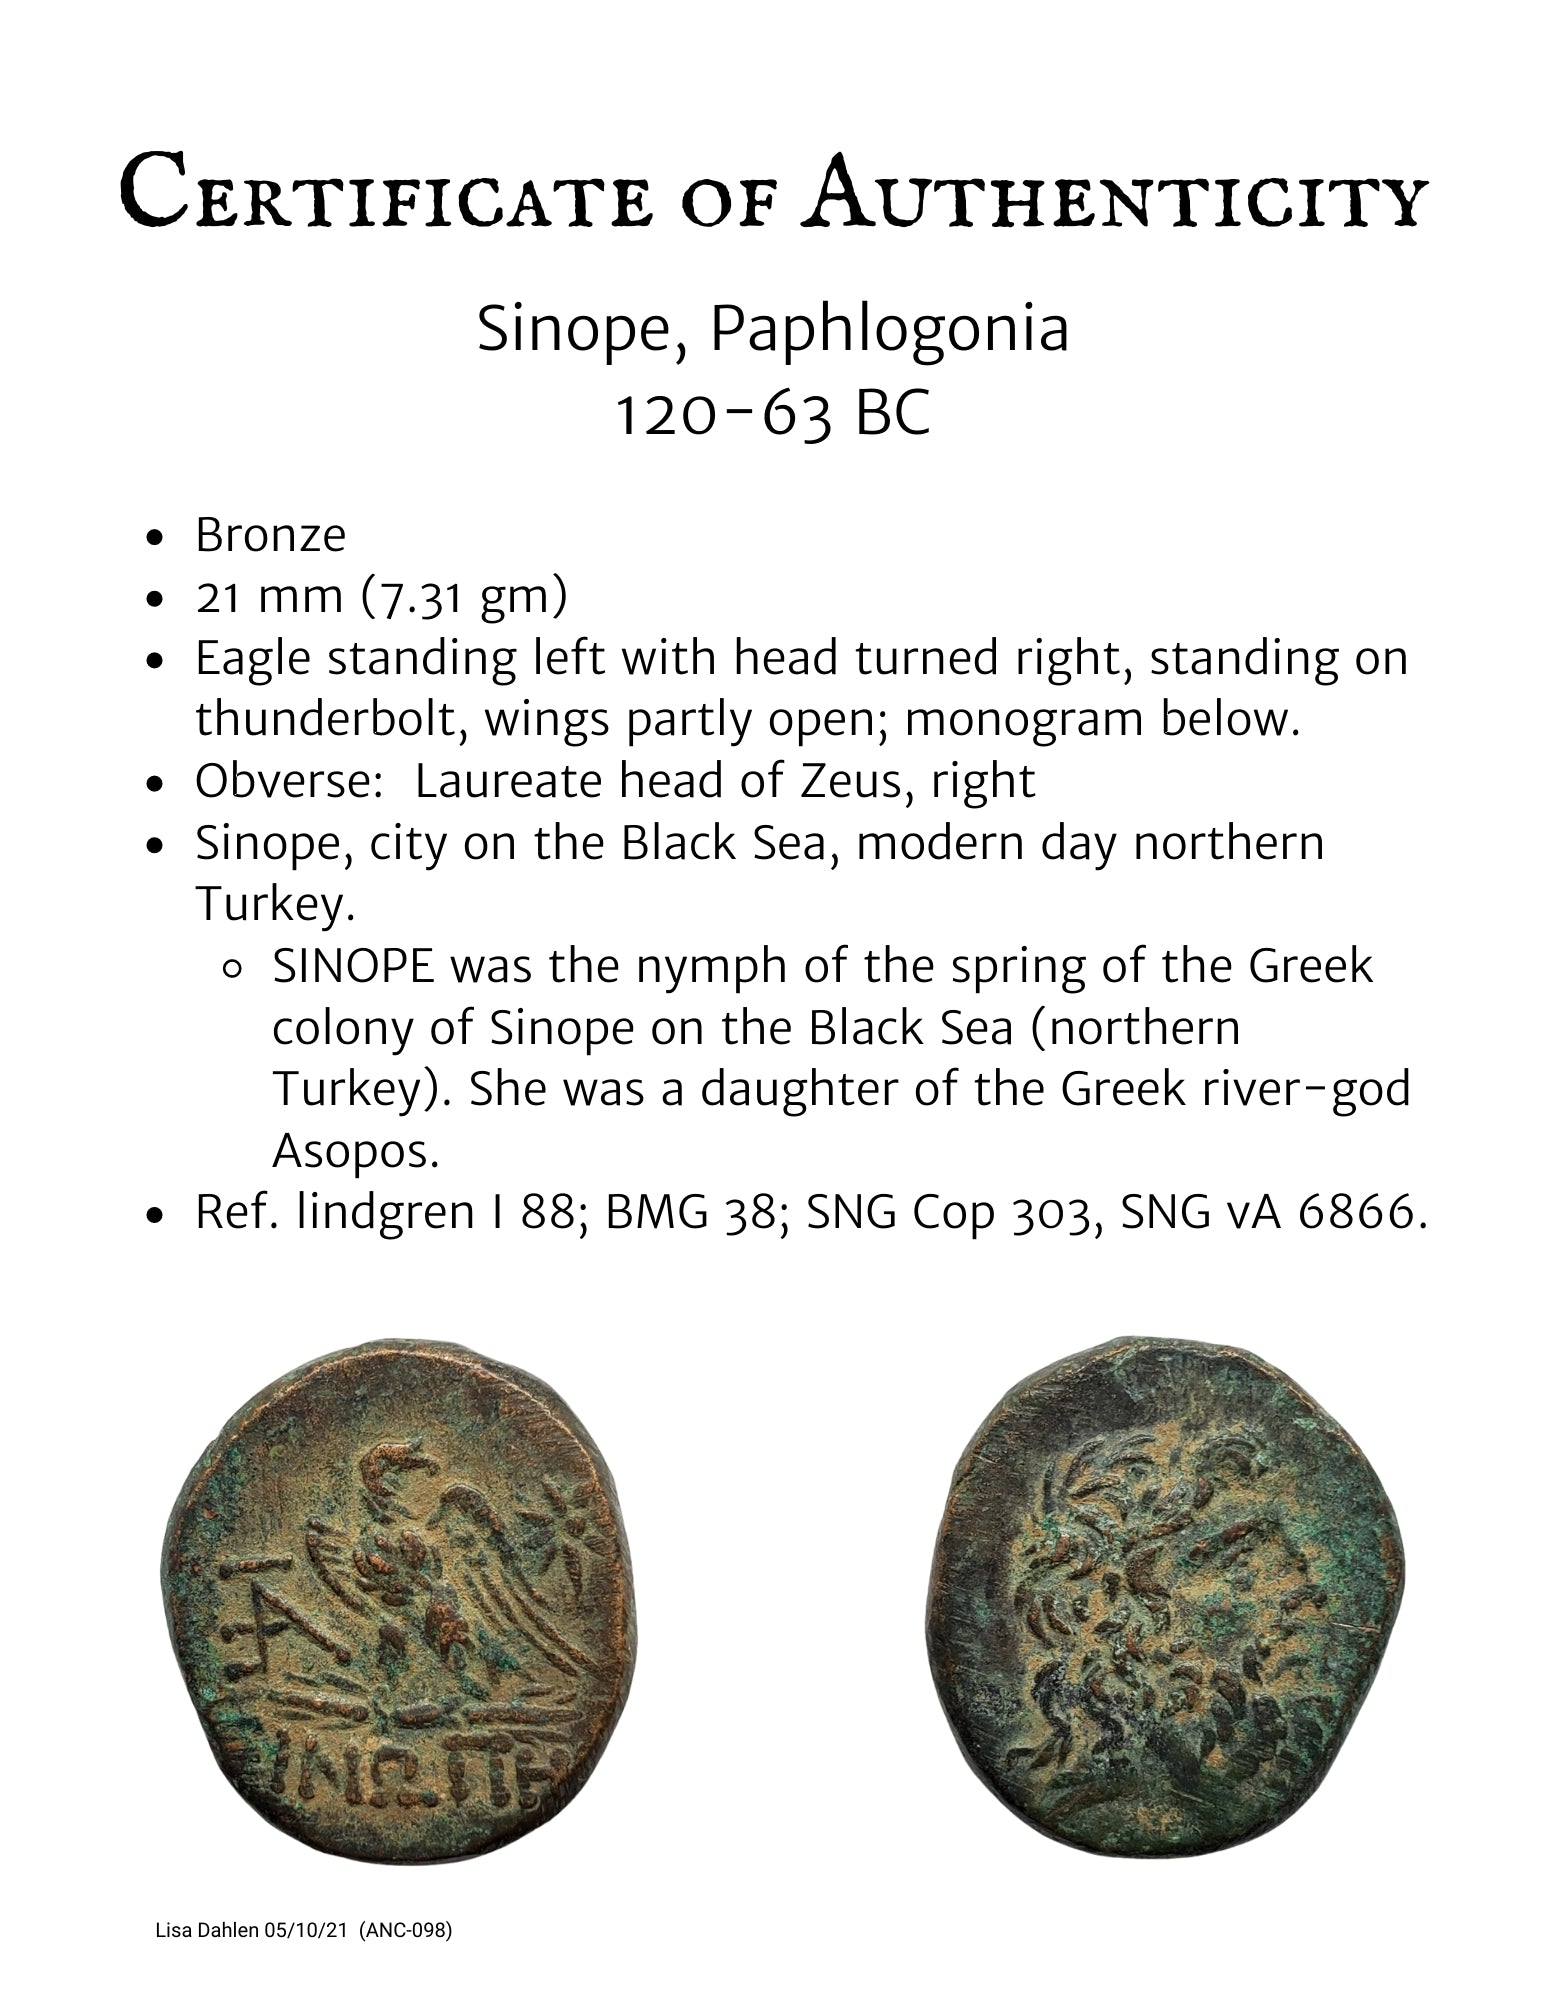 Certificate of Authenticity for Ancient Greek coin from Sinope Paphlogonia of an Eagle and Zeus  120-63 BC